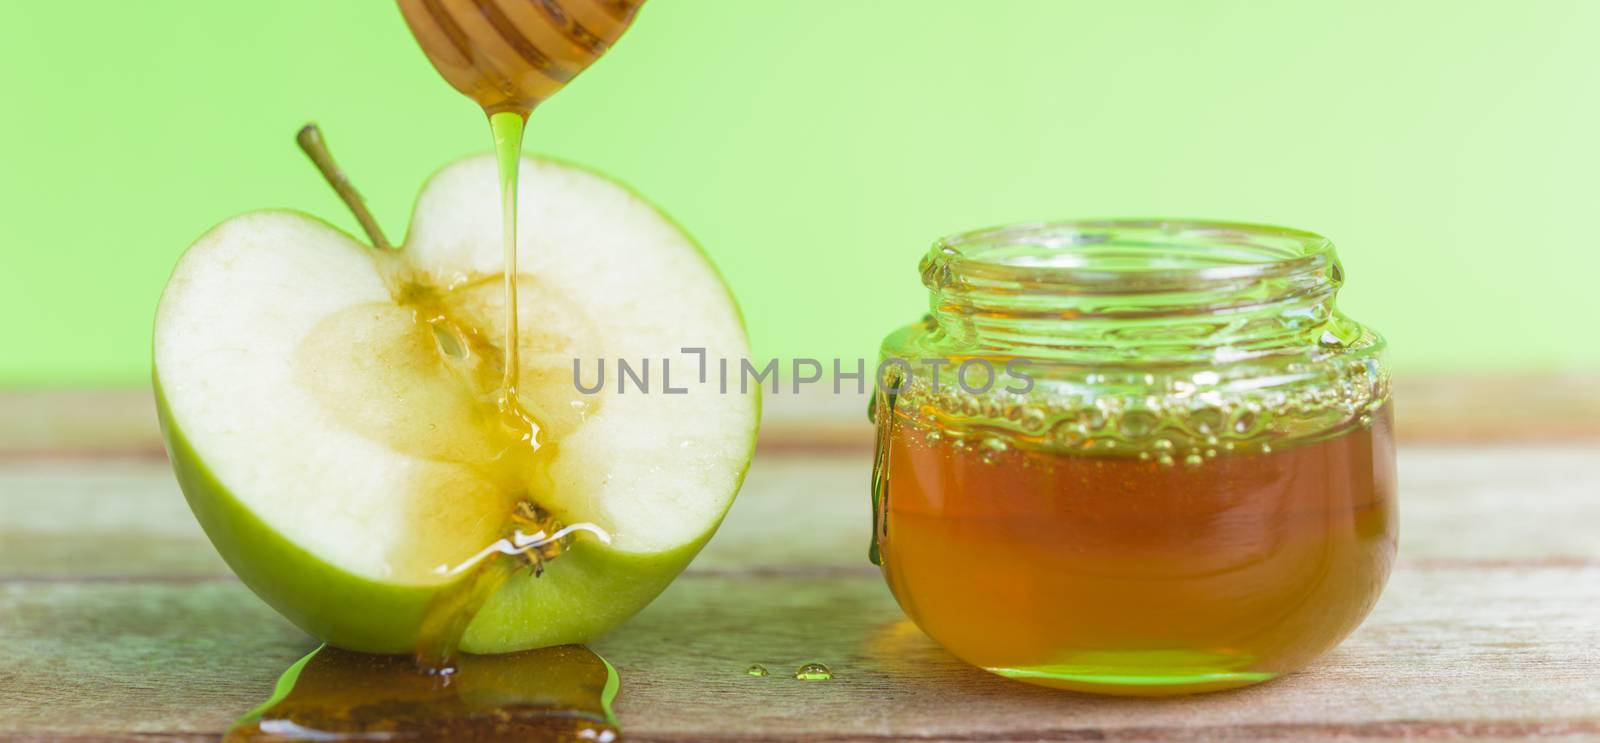 Jewish holiday, Apple Rosh Hashanah, on the photo have honey in jar and drop honey on green apples on wooden with green background